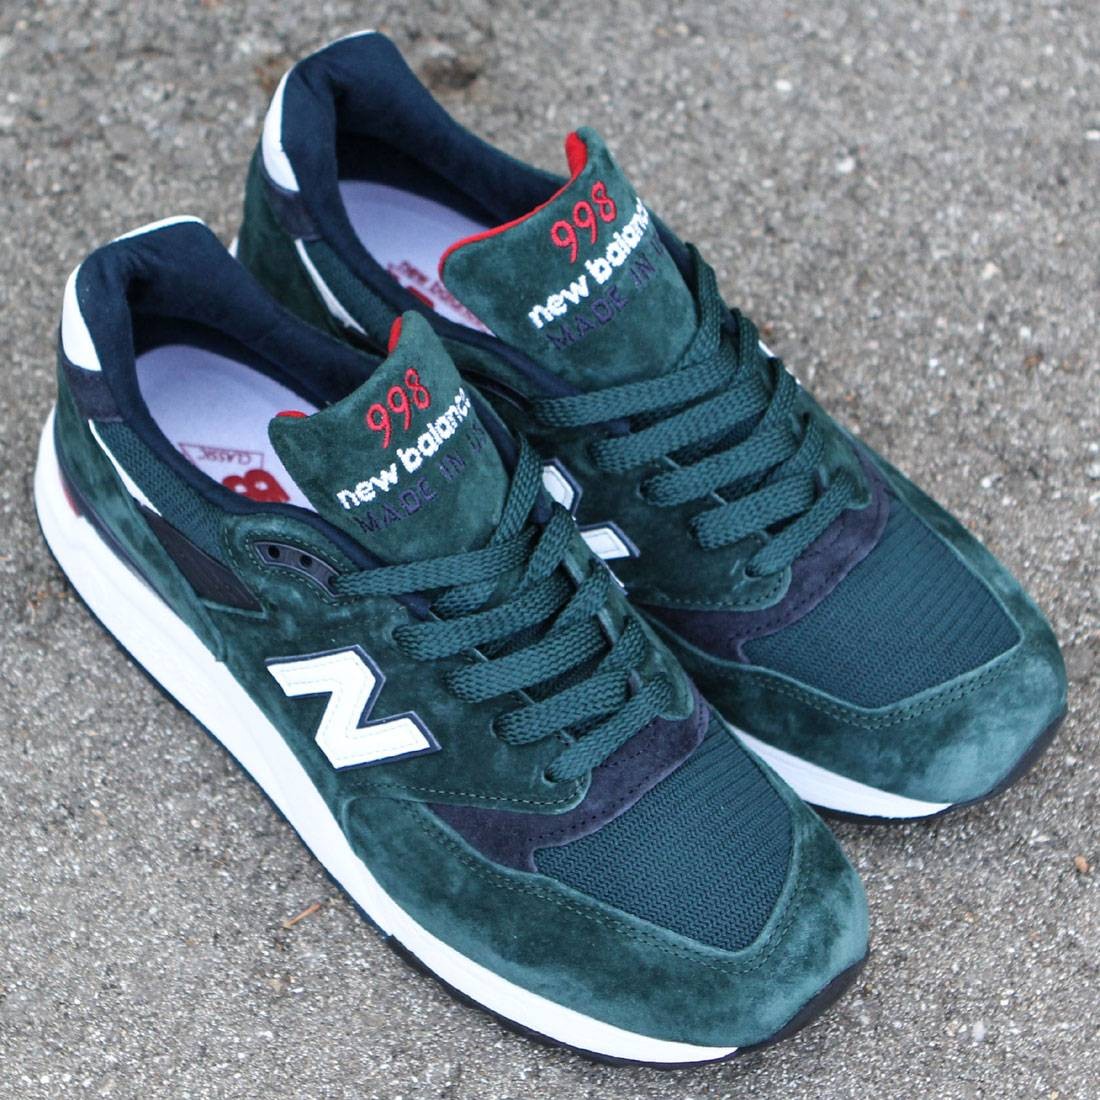 New Balance Men 998 Age of Exploration M998CHI - Made In USA (green / dark green / navy)